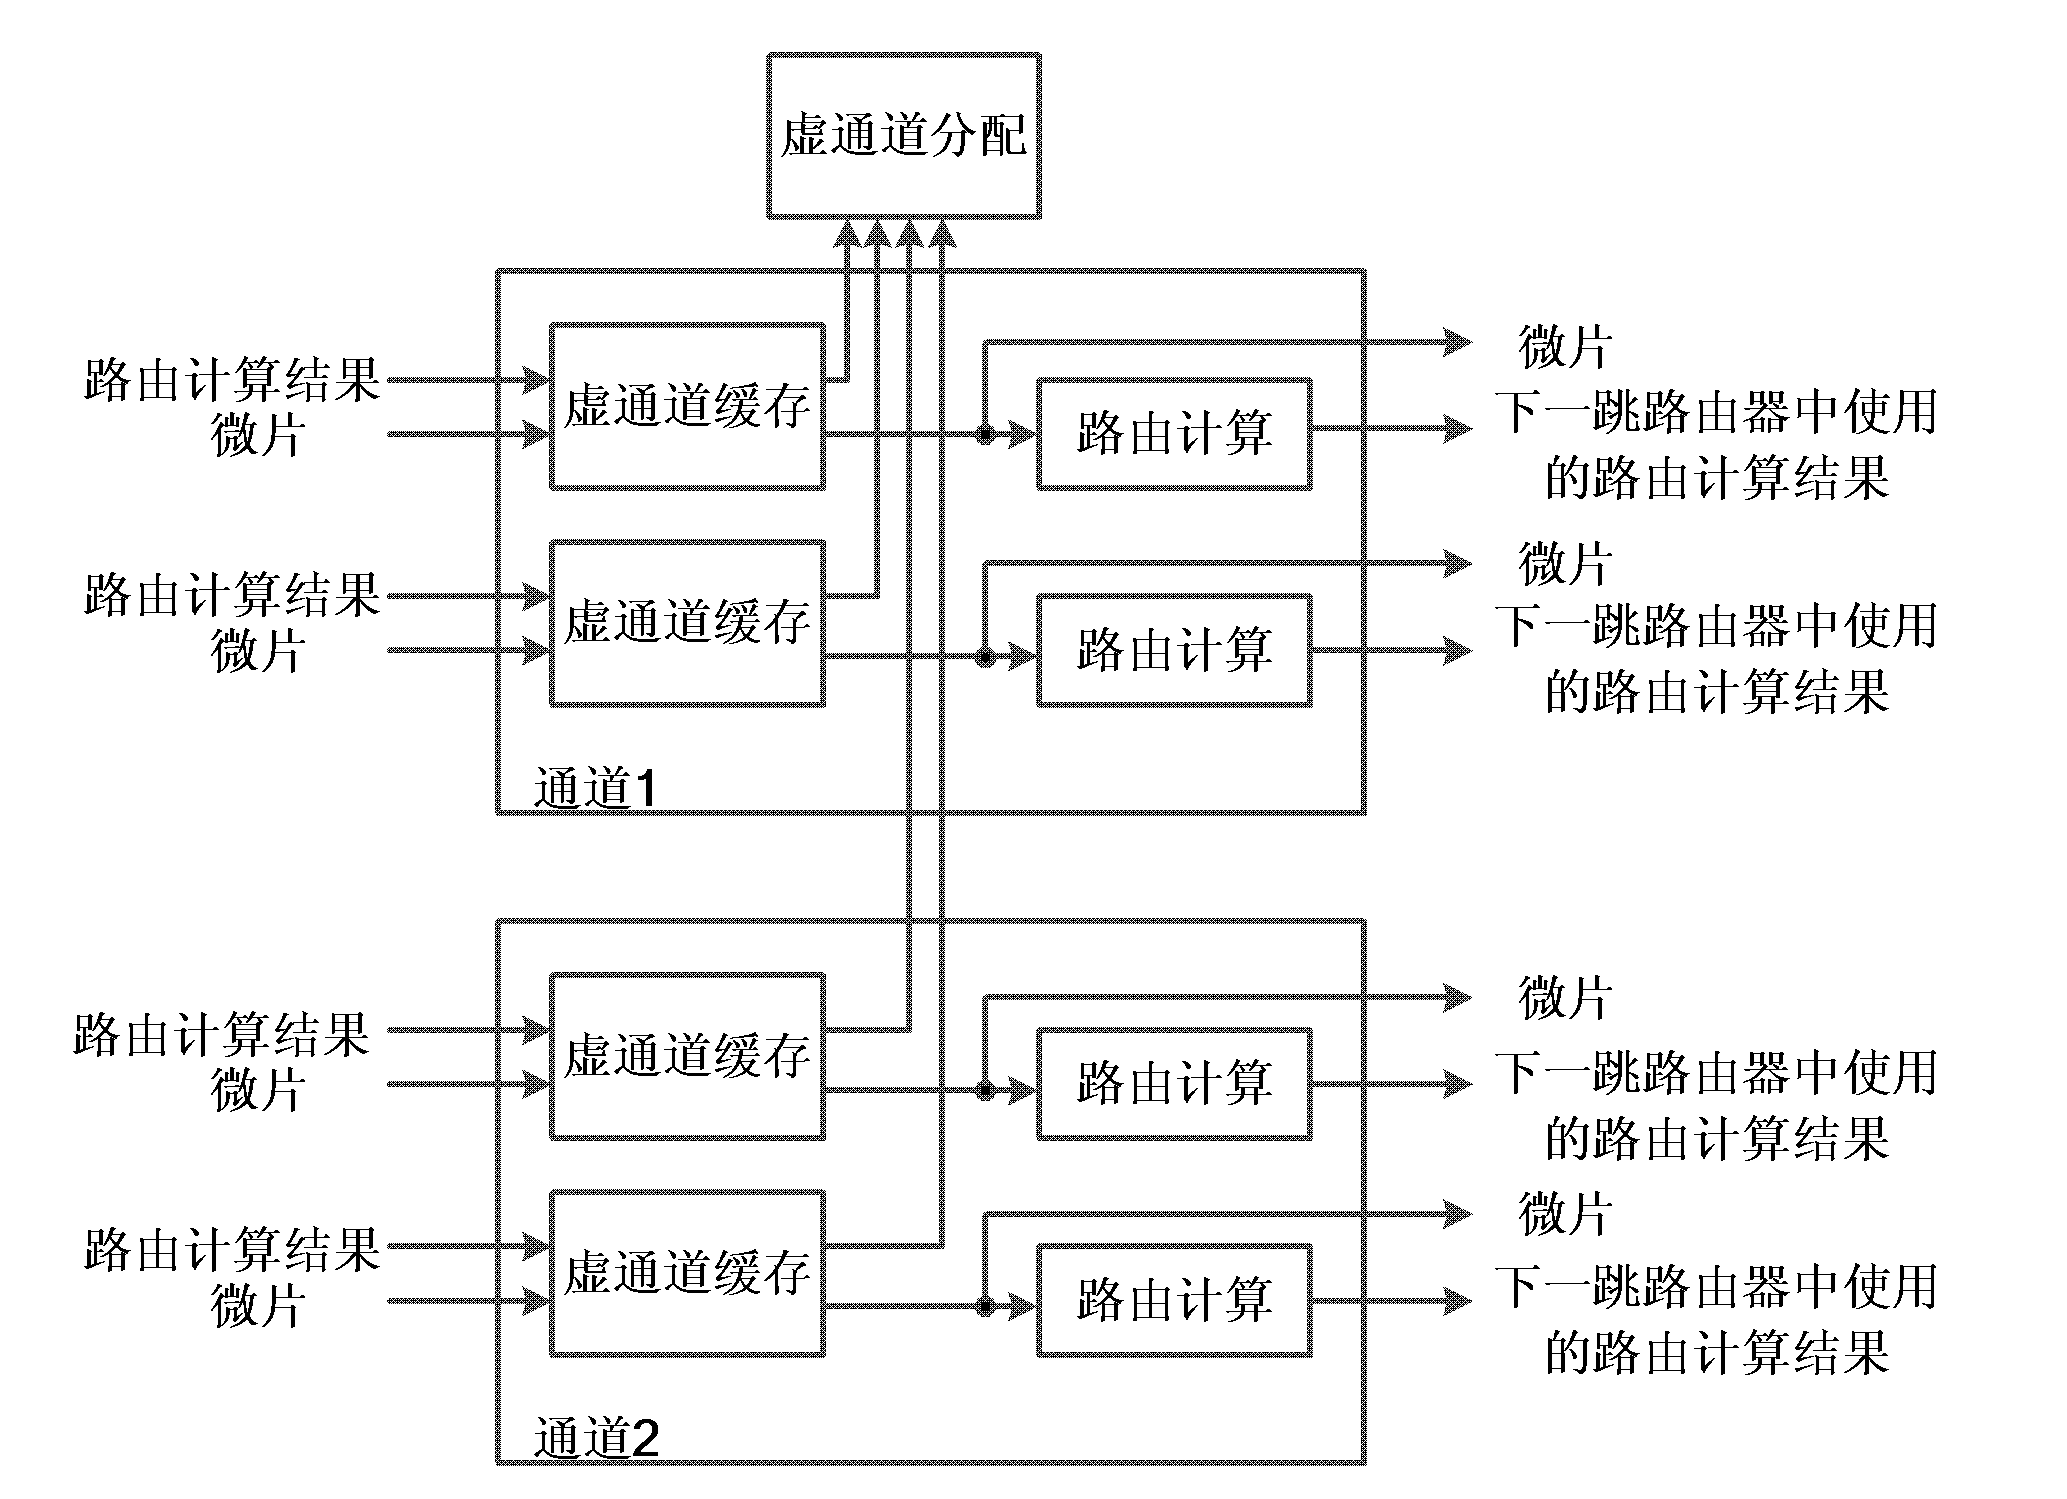 Router device suitable for globally asynchronous locally synchronous on-chip network